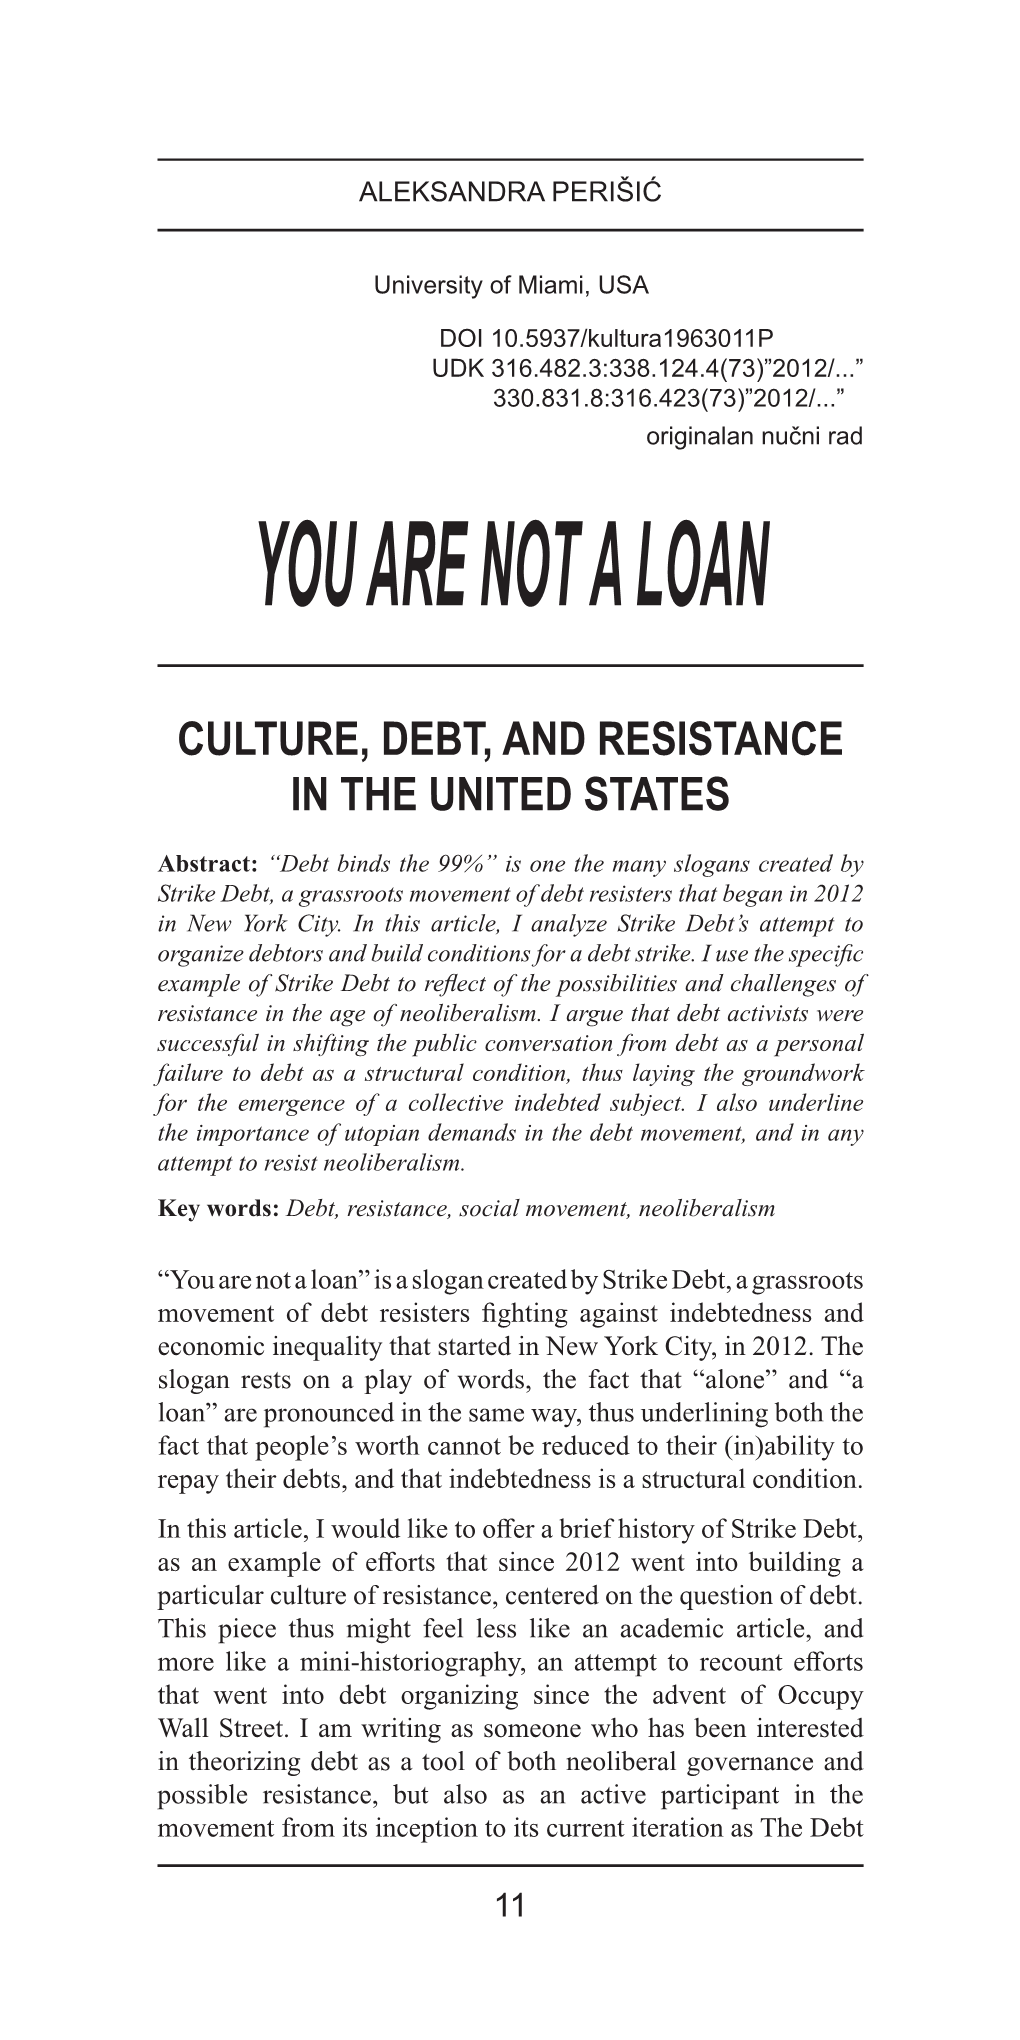 You Are Not a Loan